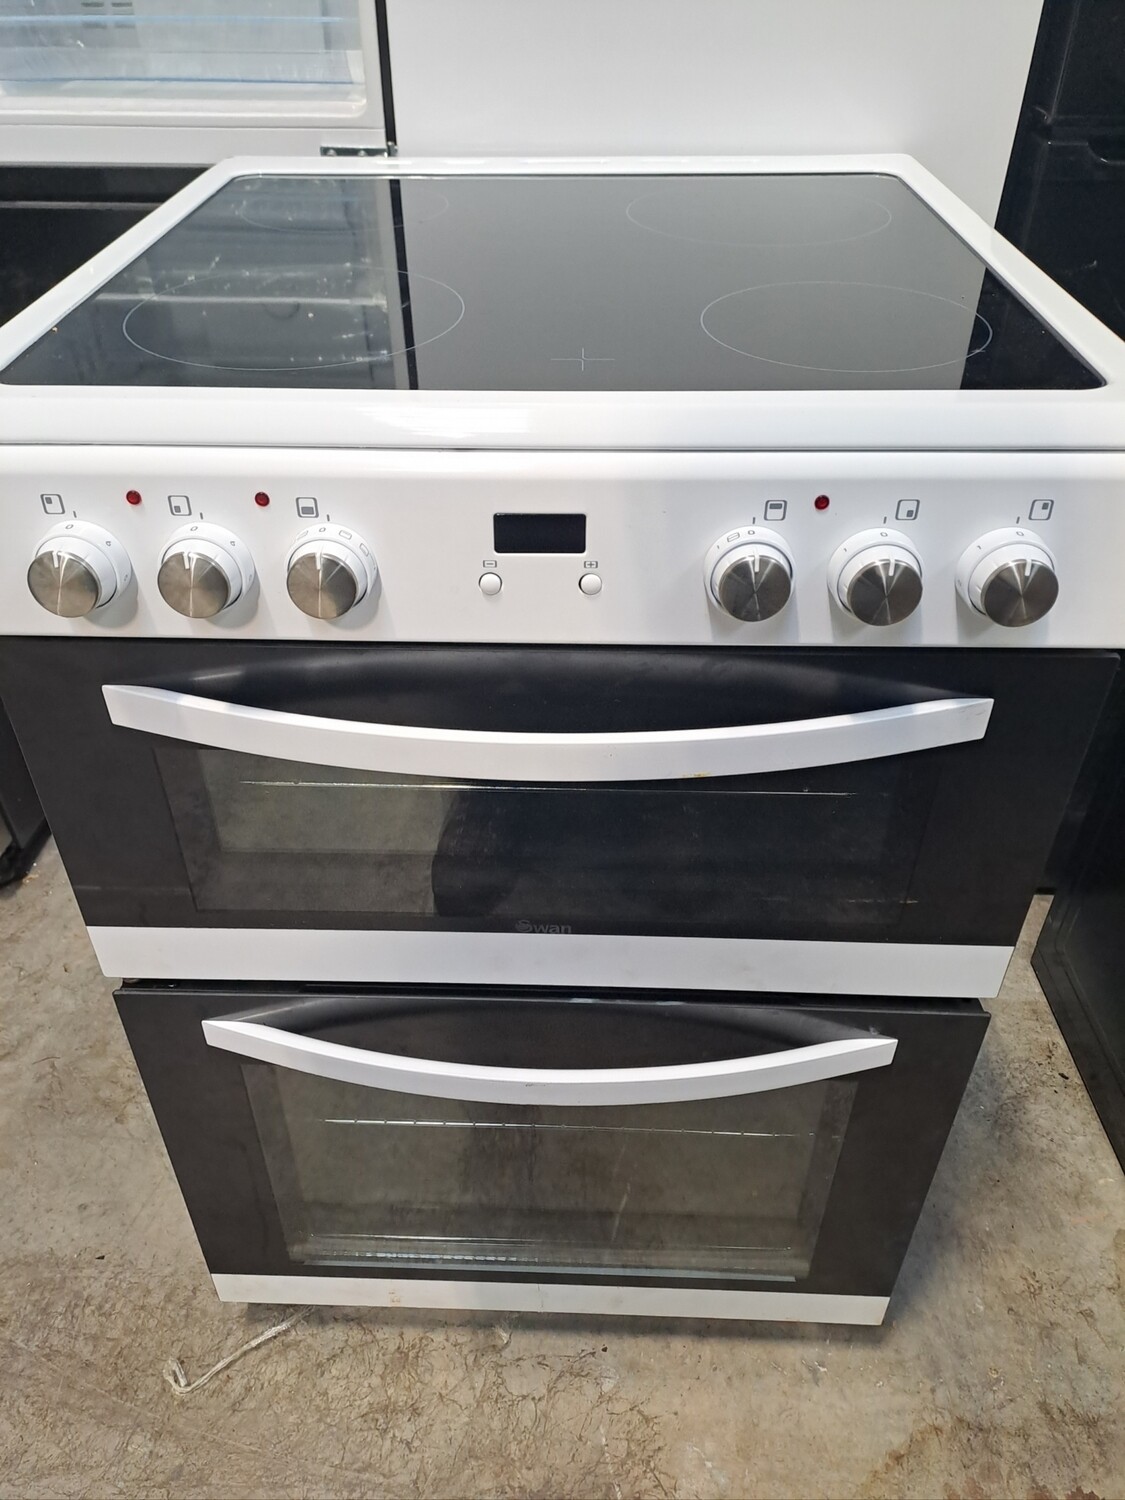 Swan SX158110W 60cm Electric Cooker New Graded (no manual) 12 month guarantee